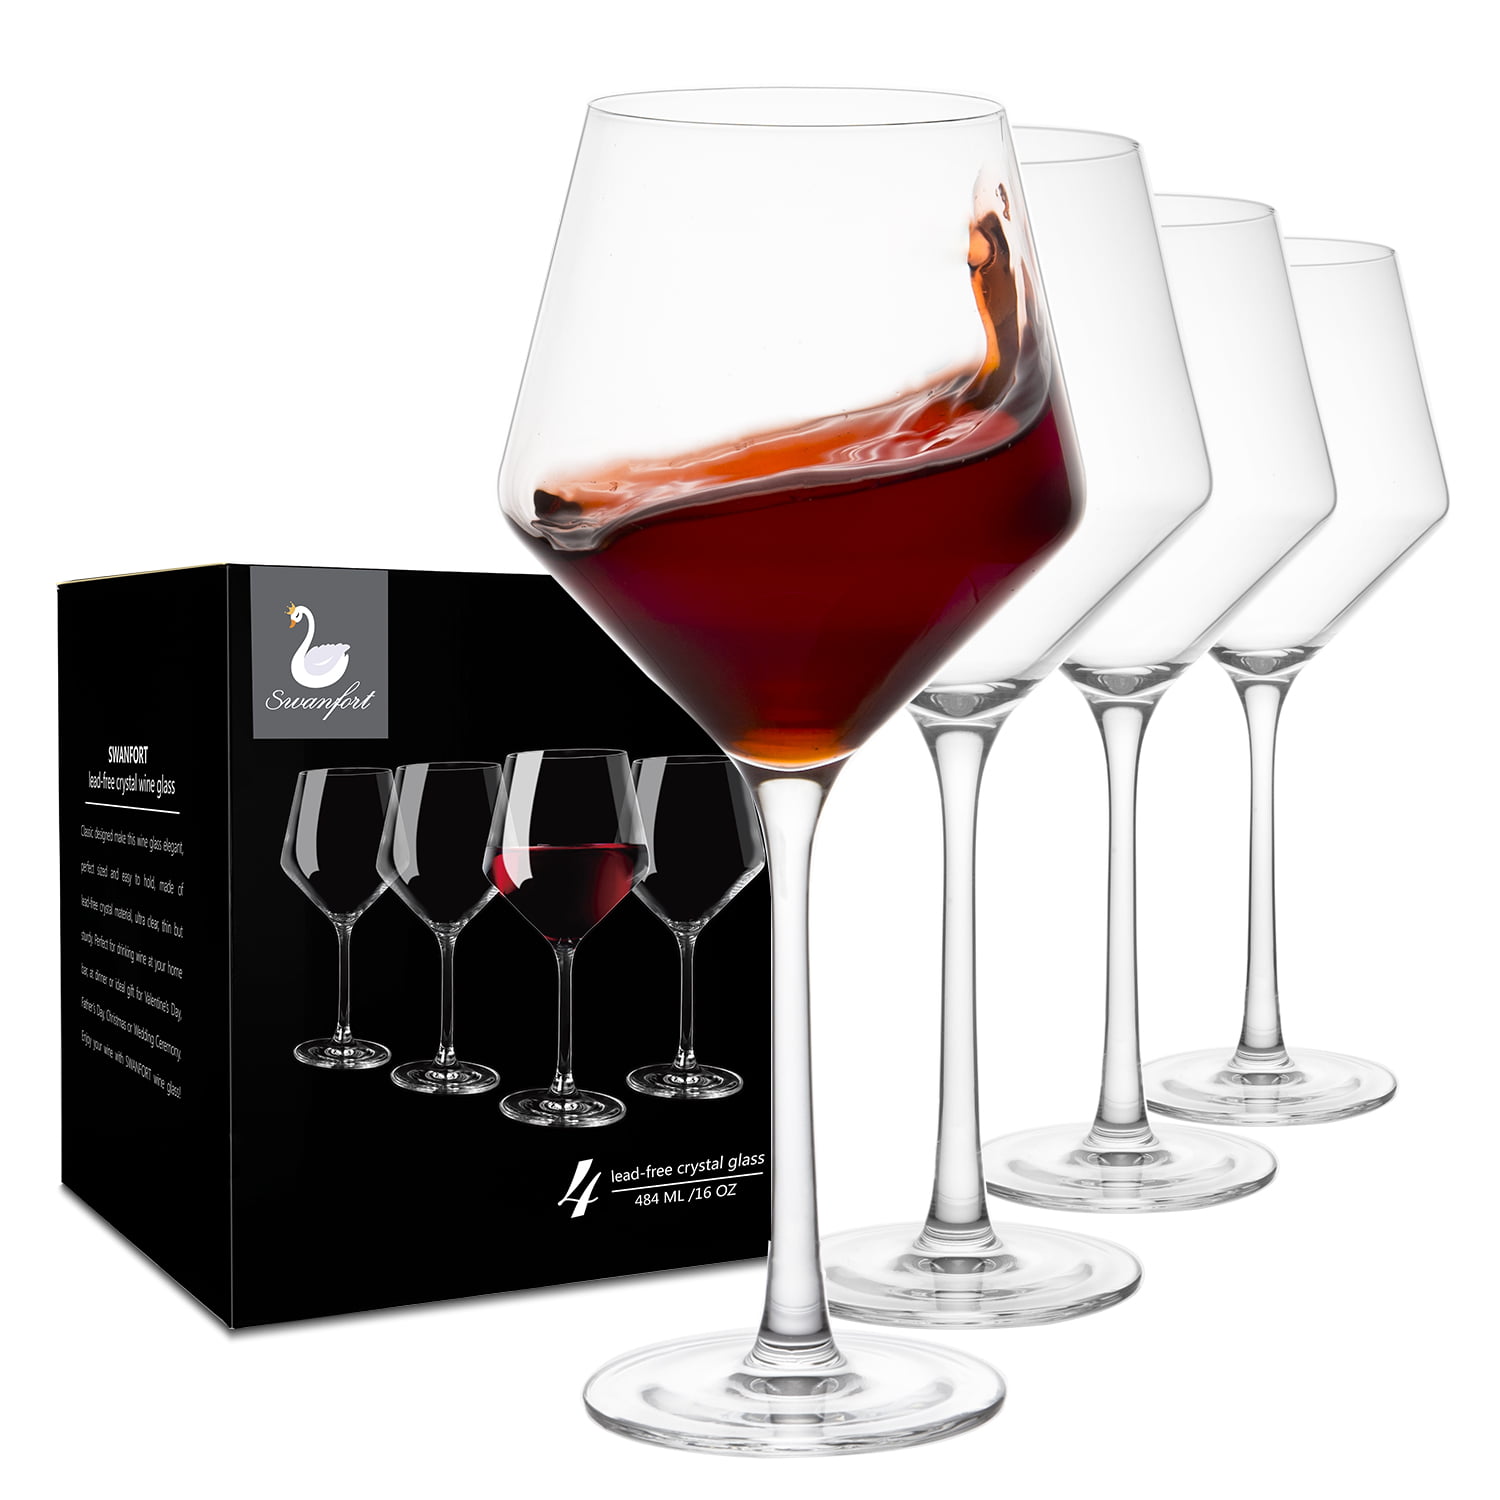 Swanfort Red Wine Glass,Set of 4 with Wine Accessories,Hand Blown Crystal Wine Glass,Lead Free Burgundy Wine Glasses,Premium Stemmed Wine Glasses,Large Bowl Wine Glass Set in Gift Box-340 ml